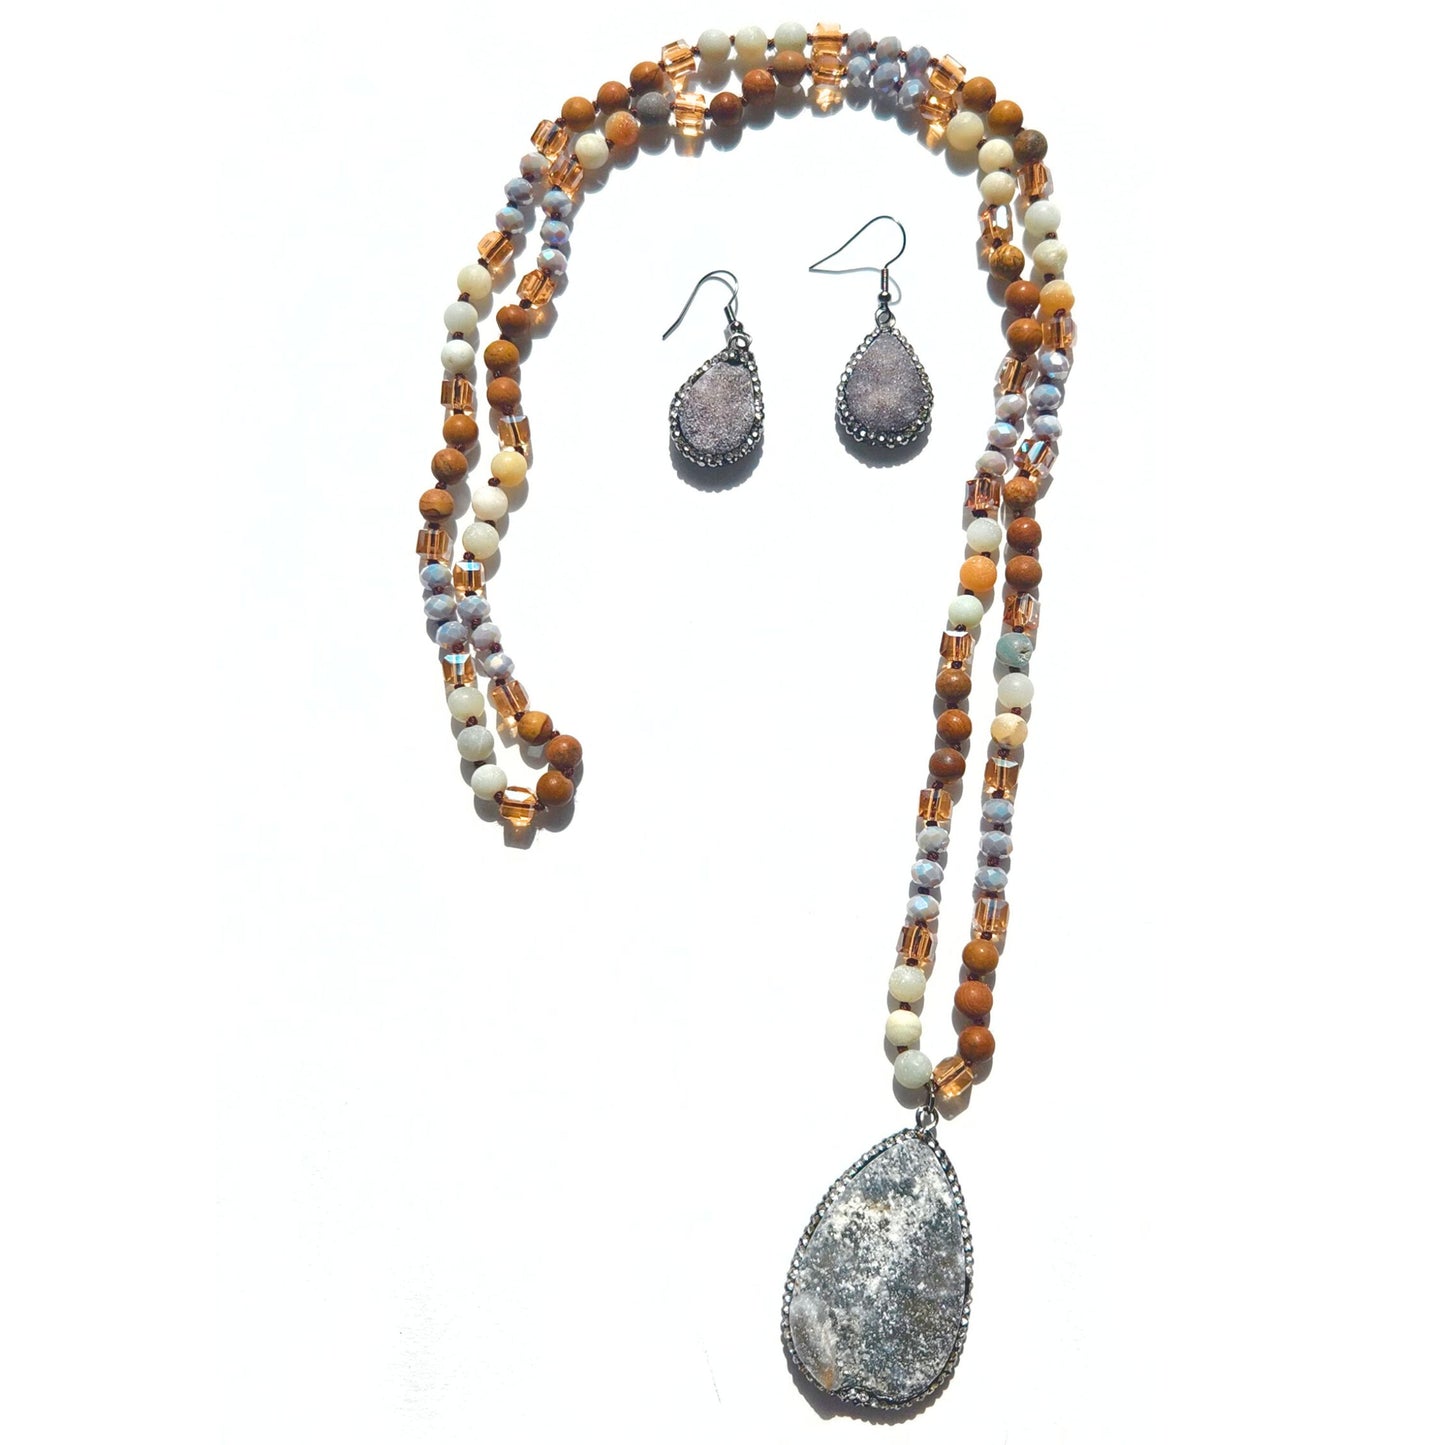 a necklace and earring set made of beads